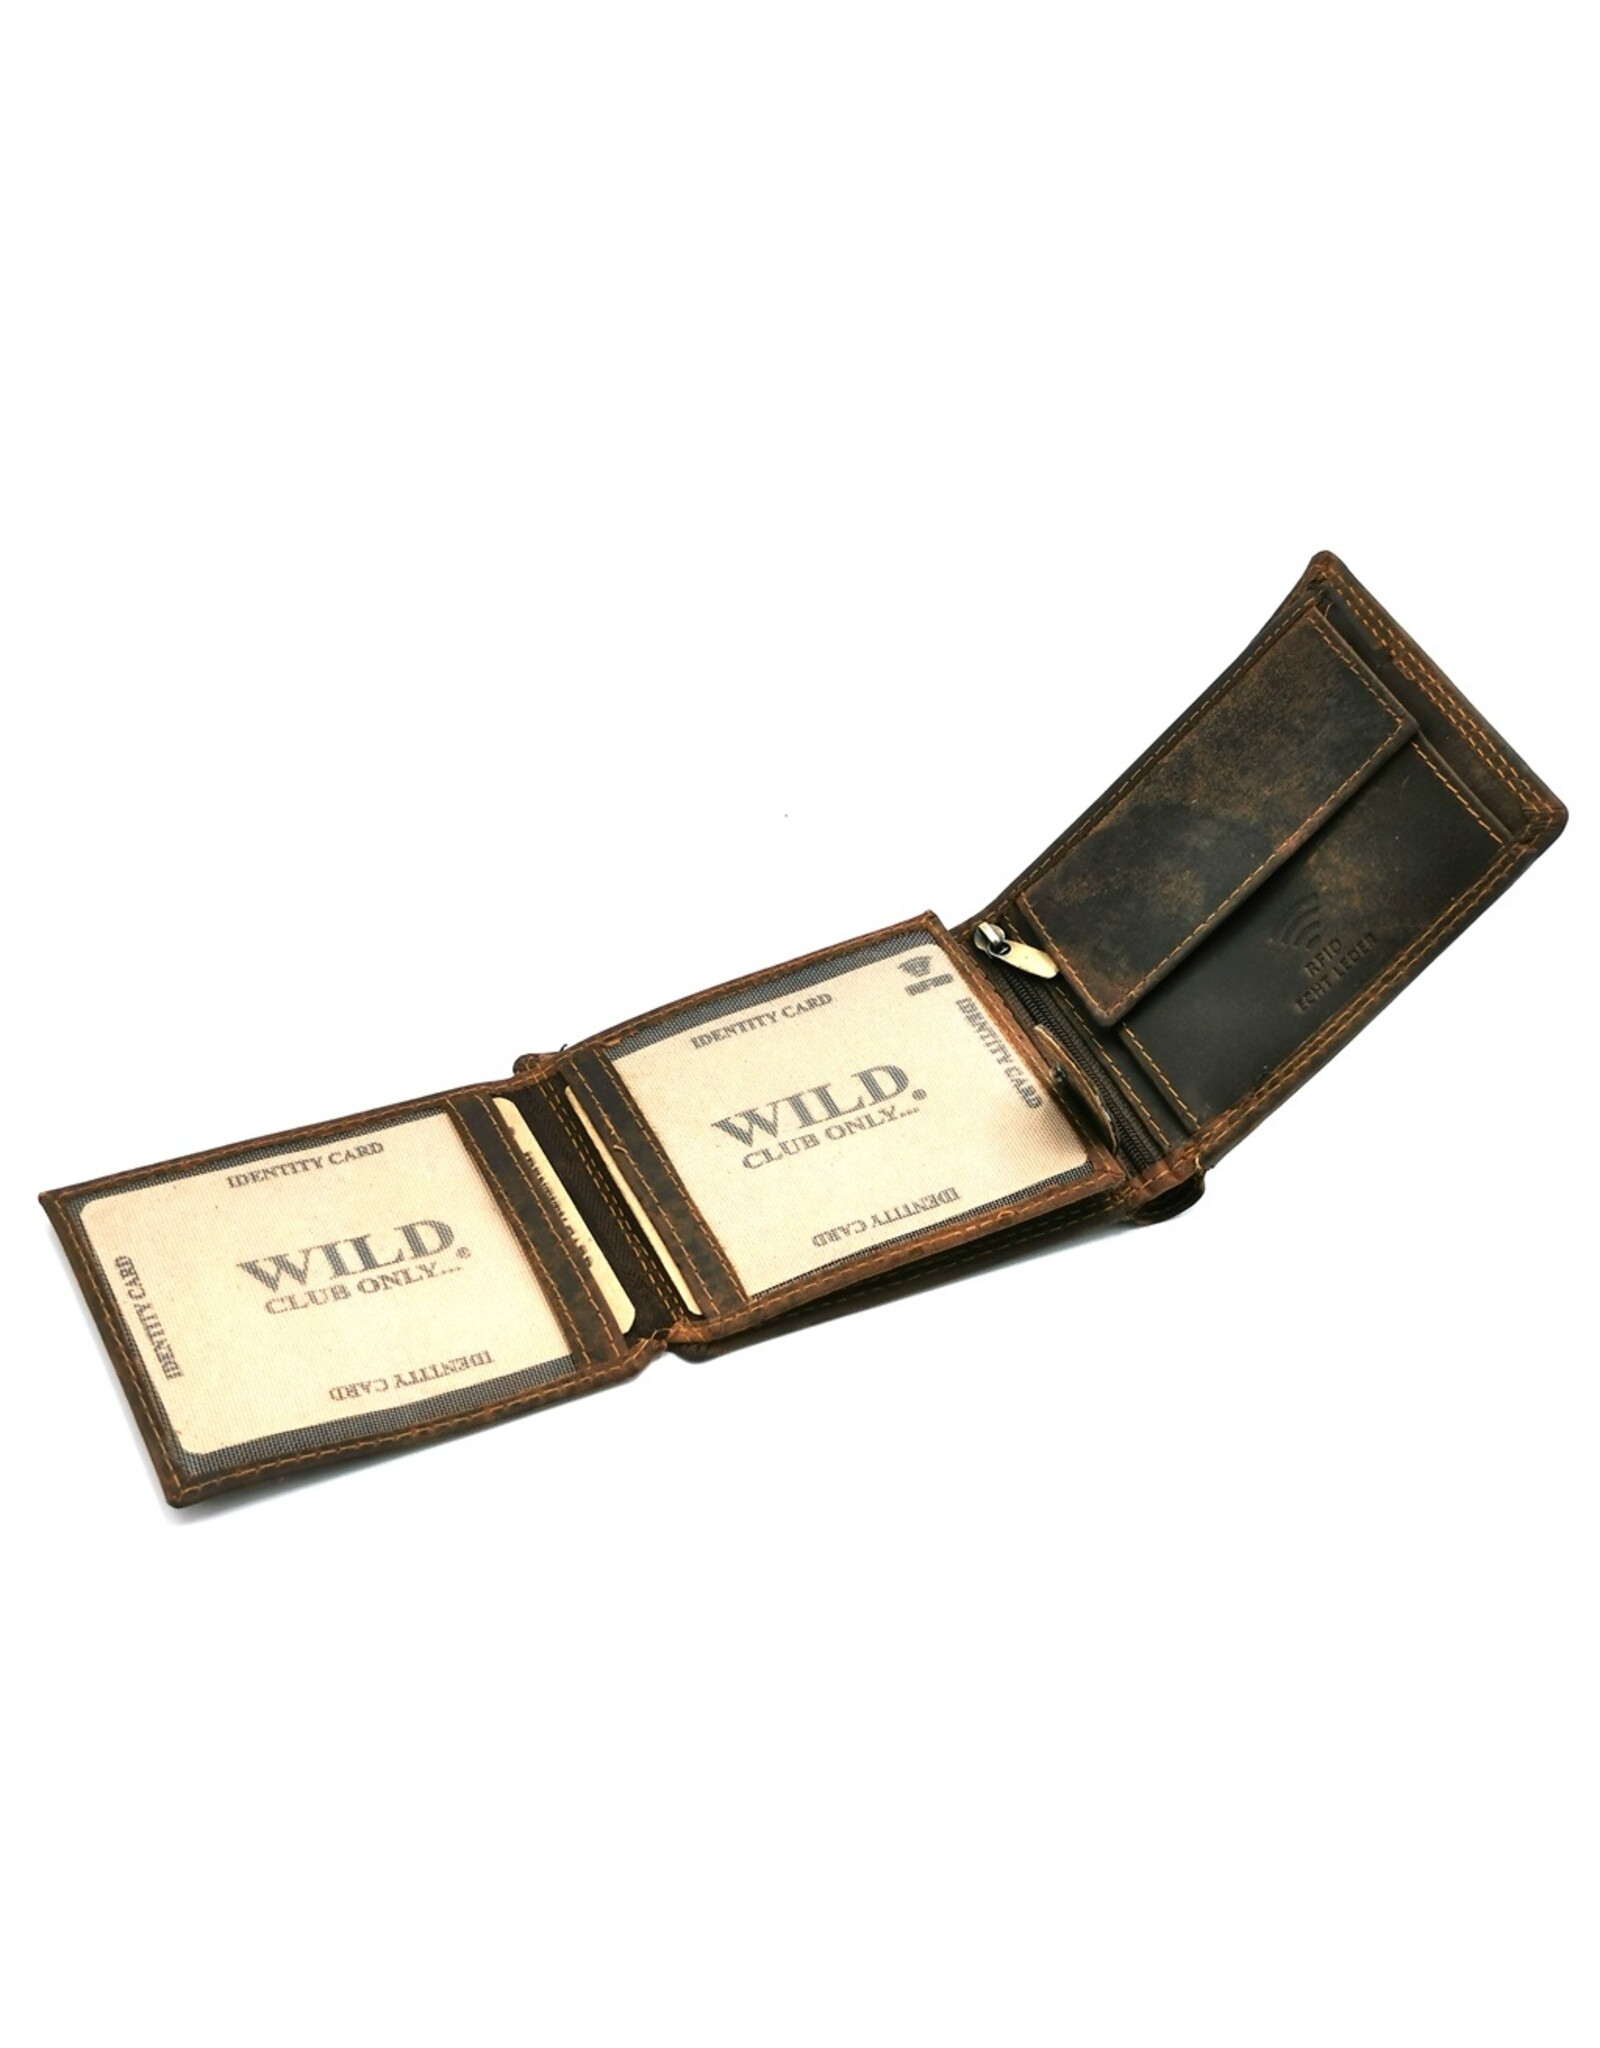 Wild Club Leather Wallets - Leather wallet with Shepherd dog RFID